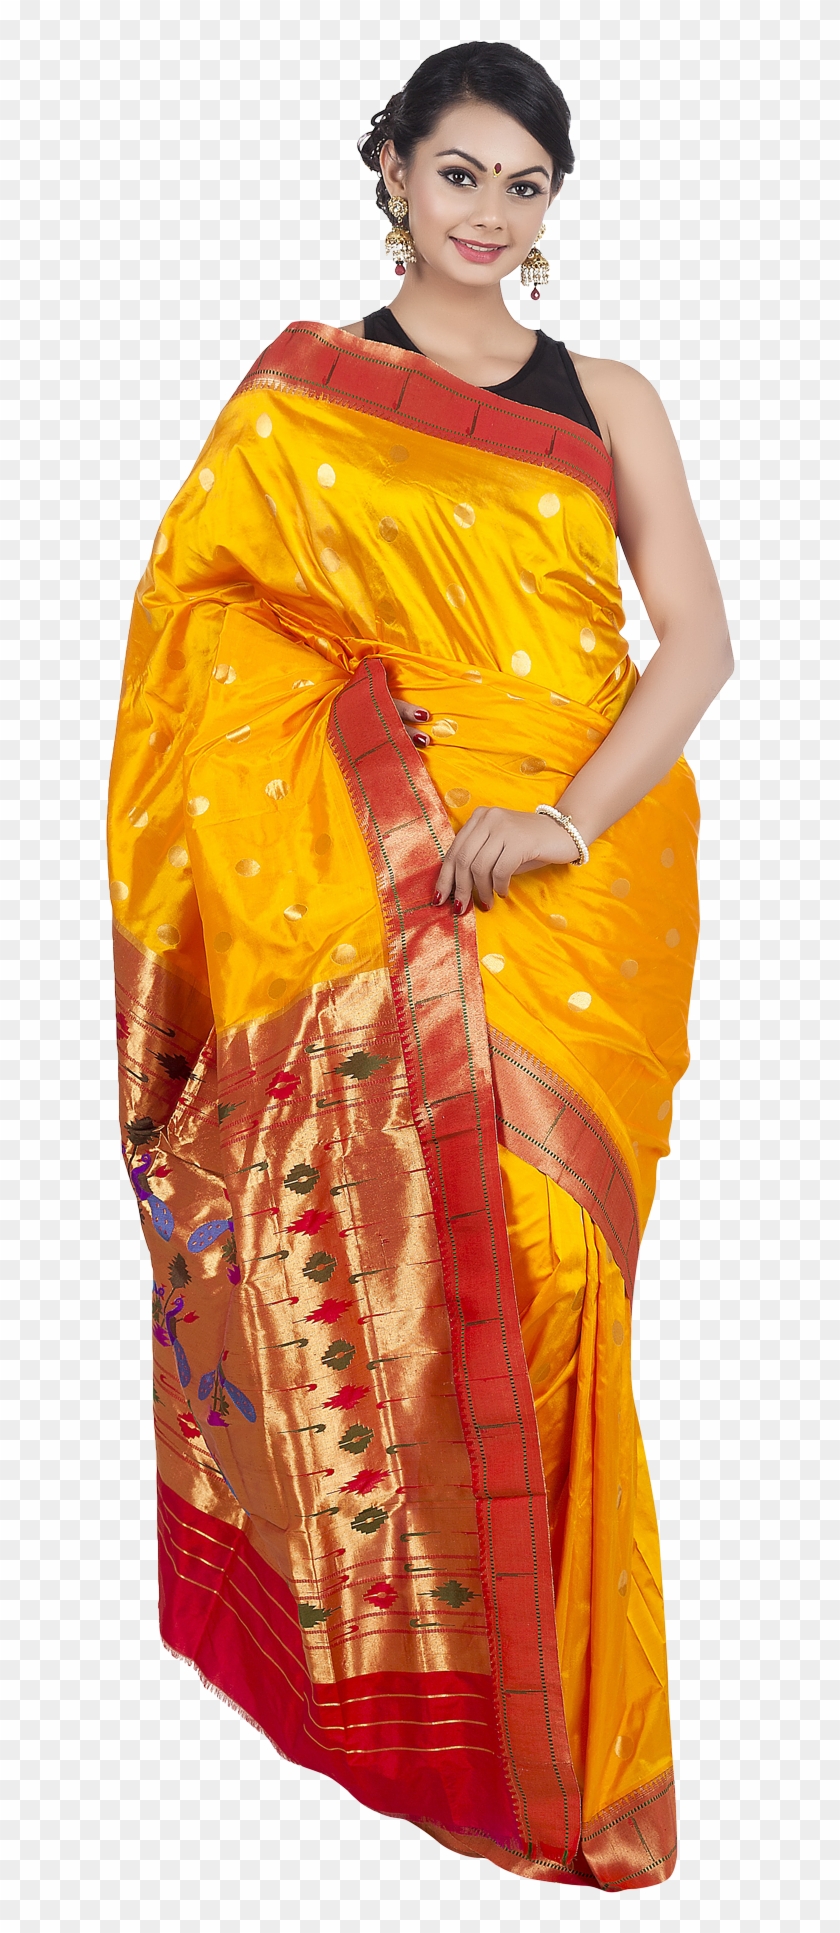 Girl In Saree Png Clipart #120526